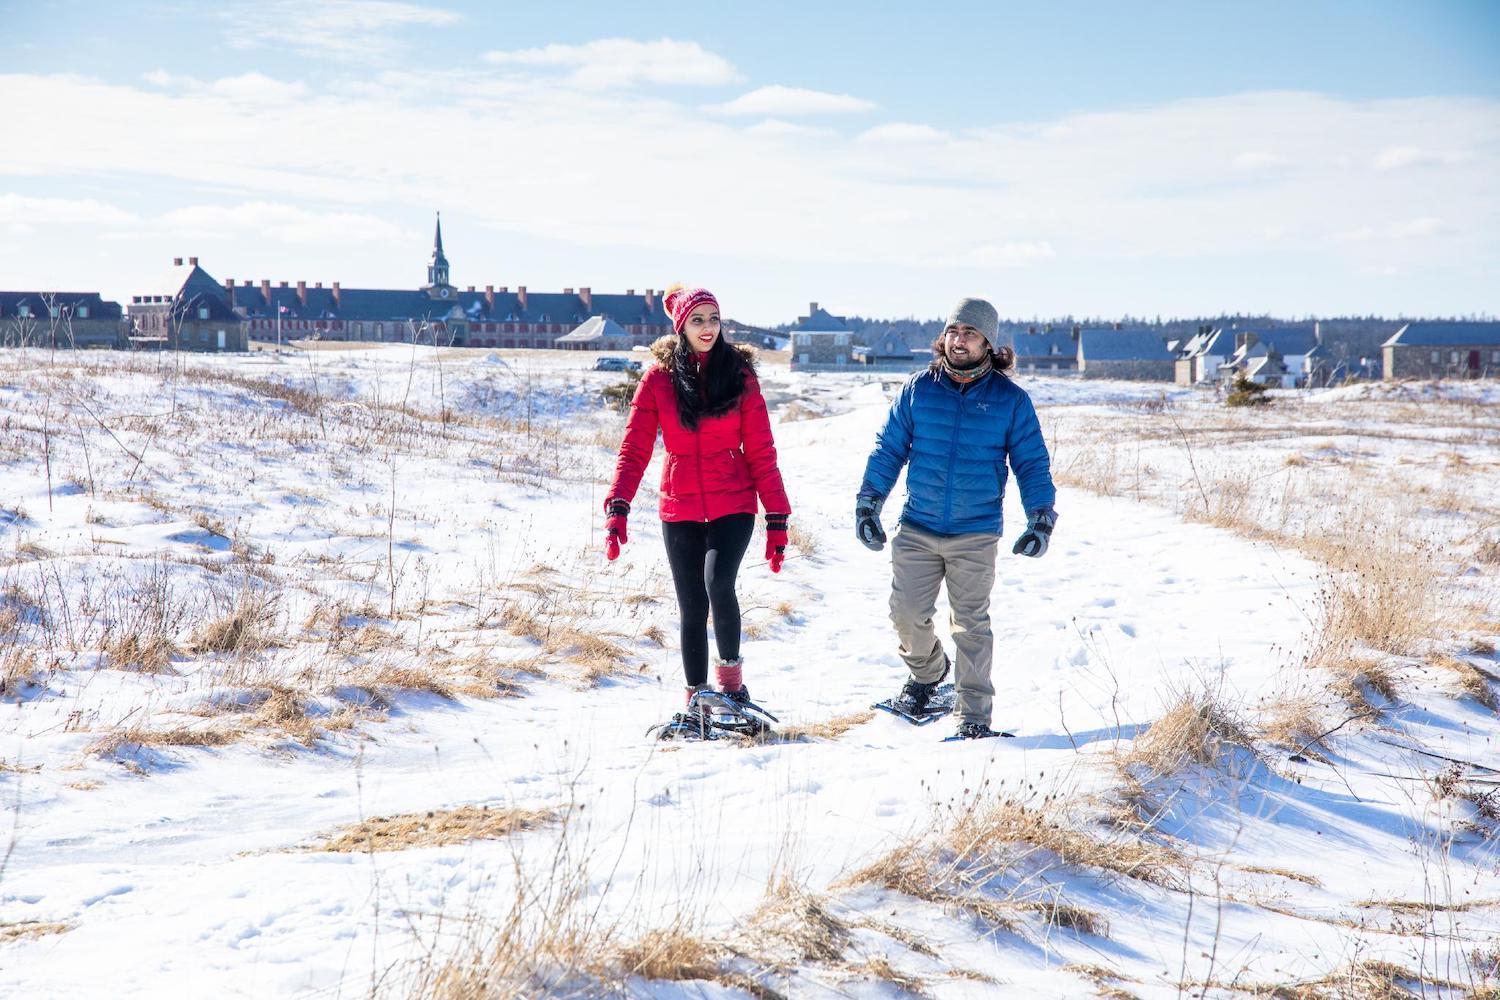 You can walk, or snowshoe, the Ruins Walk at the Fortress of Louisbourg National Historic Site in Cape Breton.